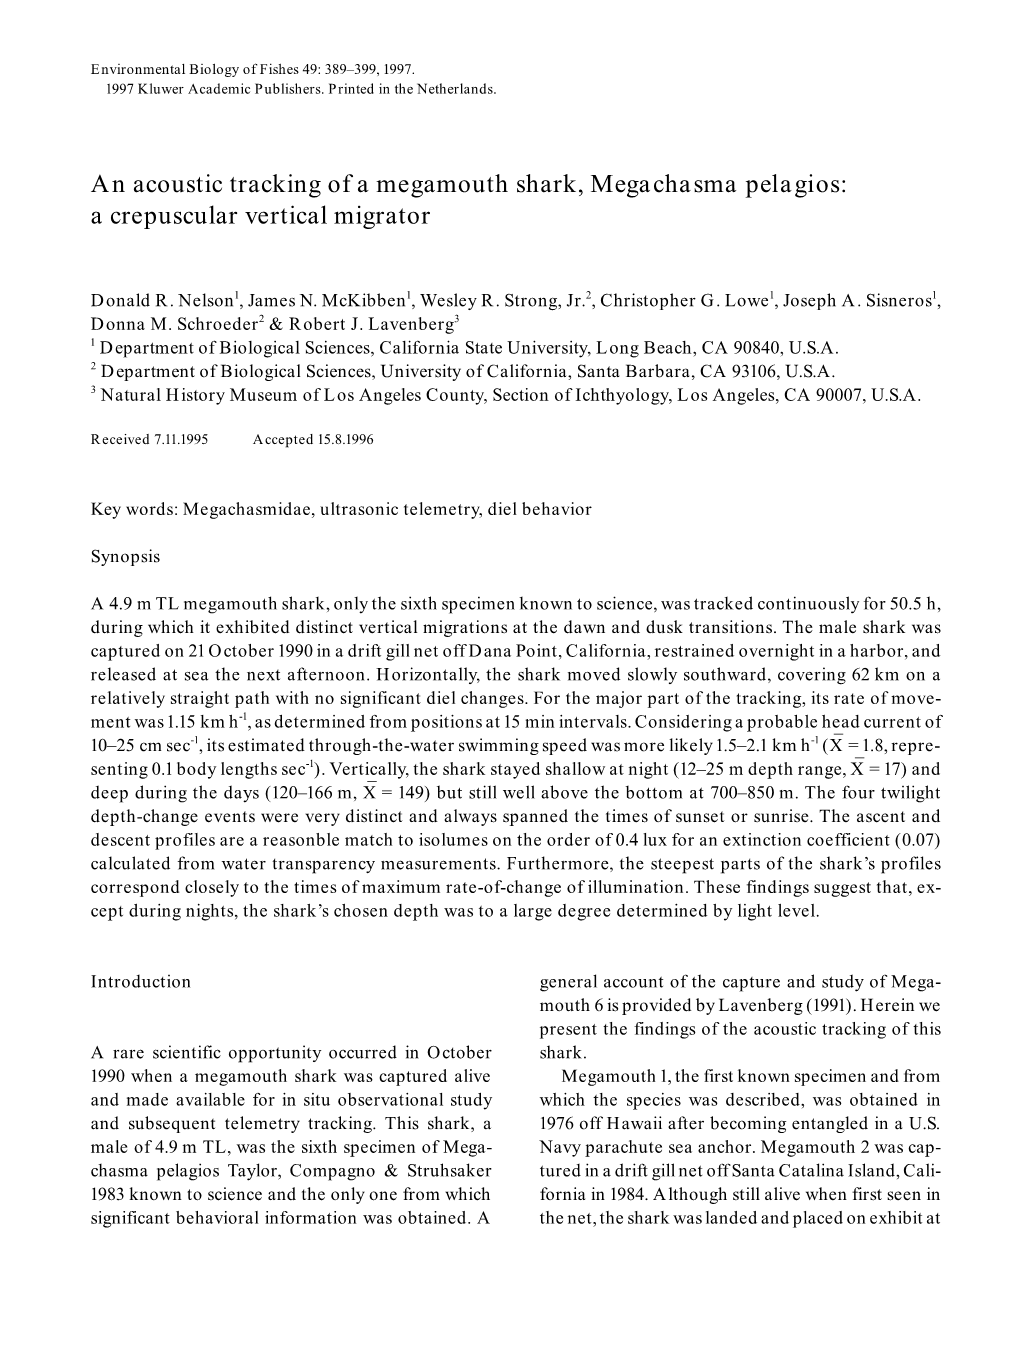 An Acoustic Tracking of a Megamouth Shark, Megachasma Pelagios: a Crepuscular Vertical Migrator